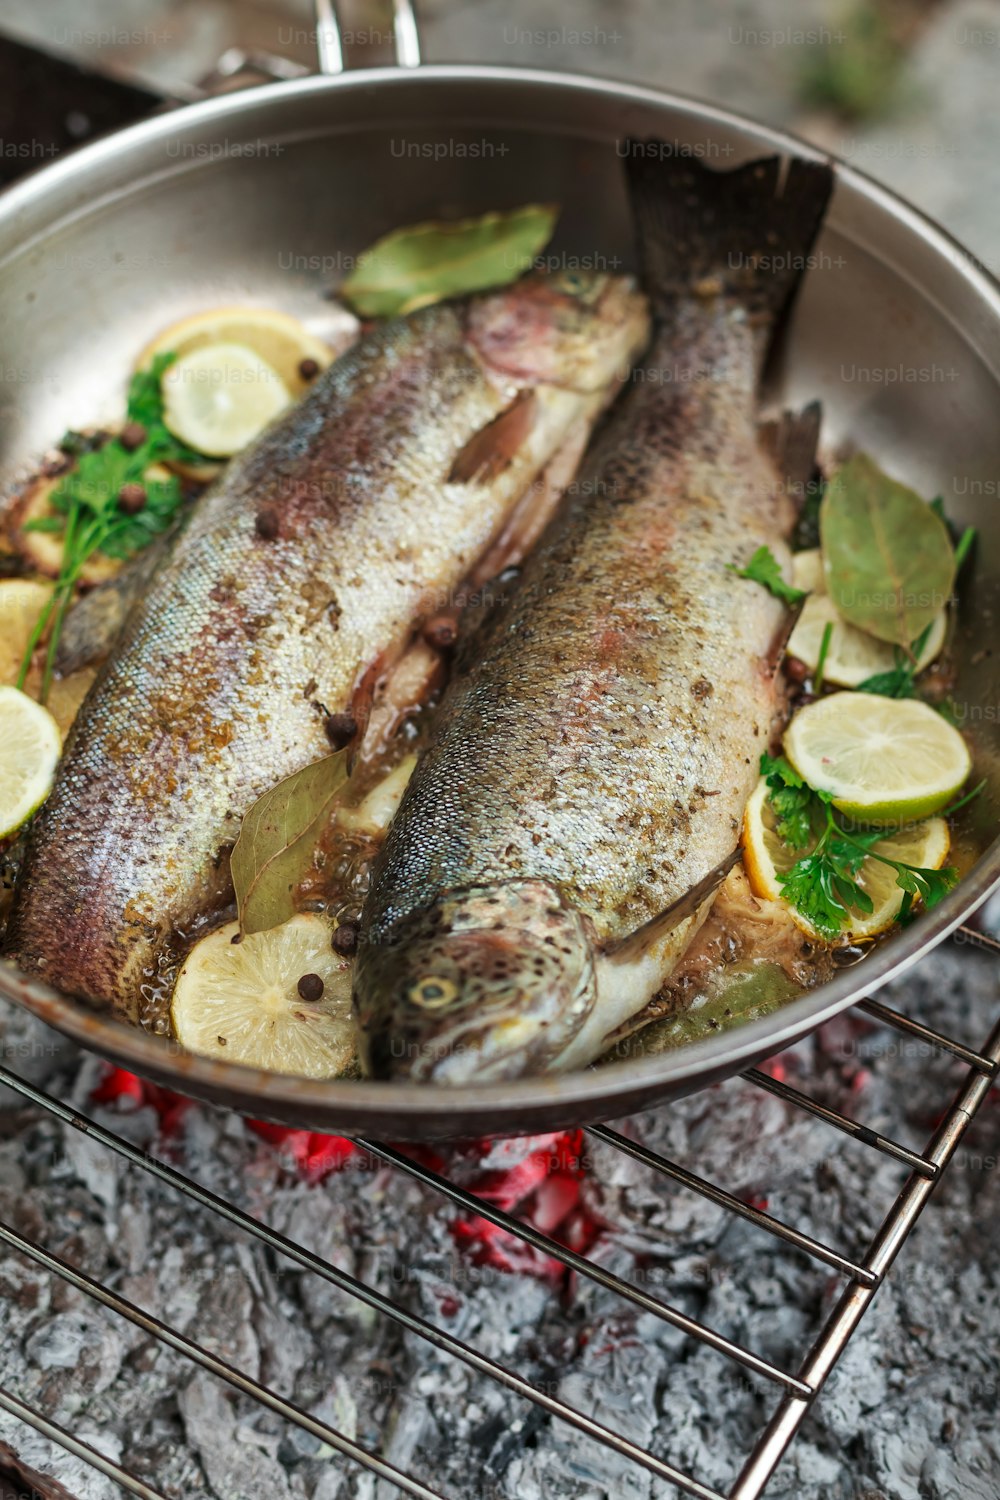 two fish are cooking in a pan on a grill